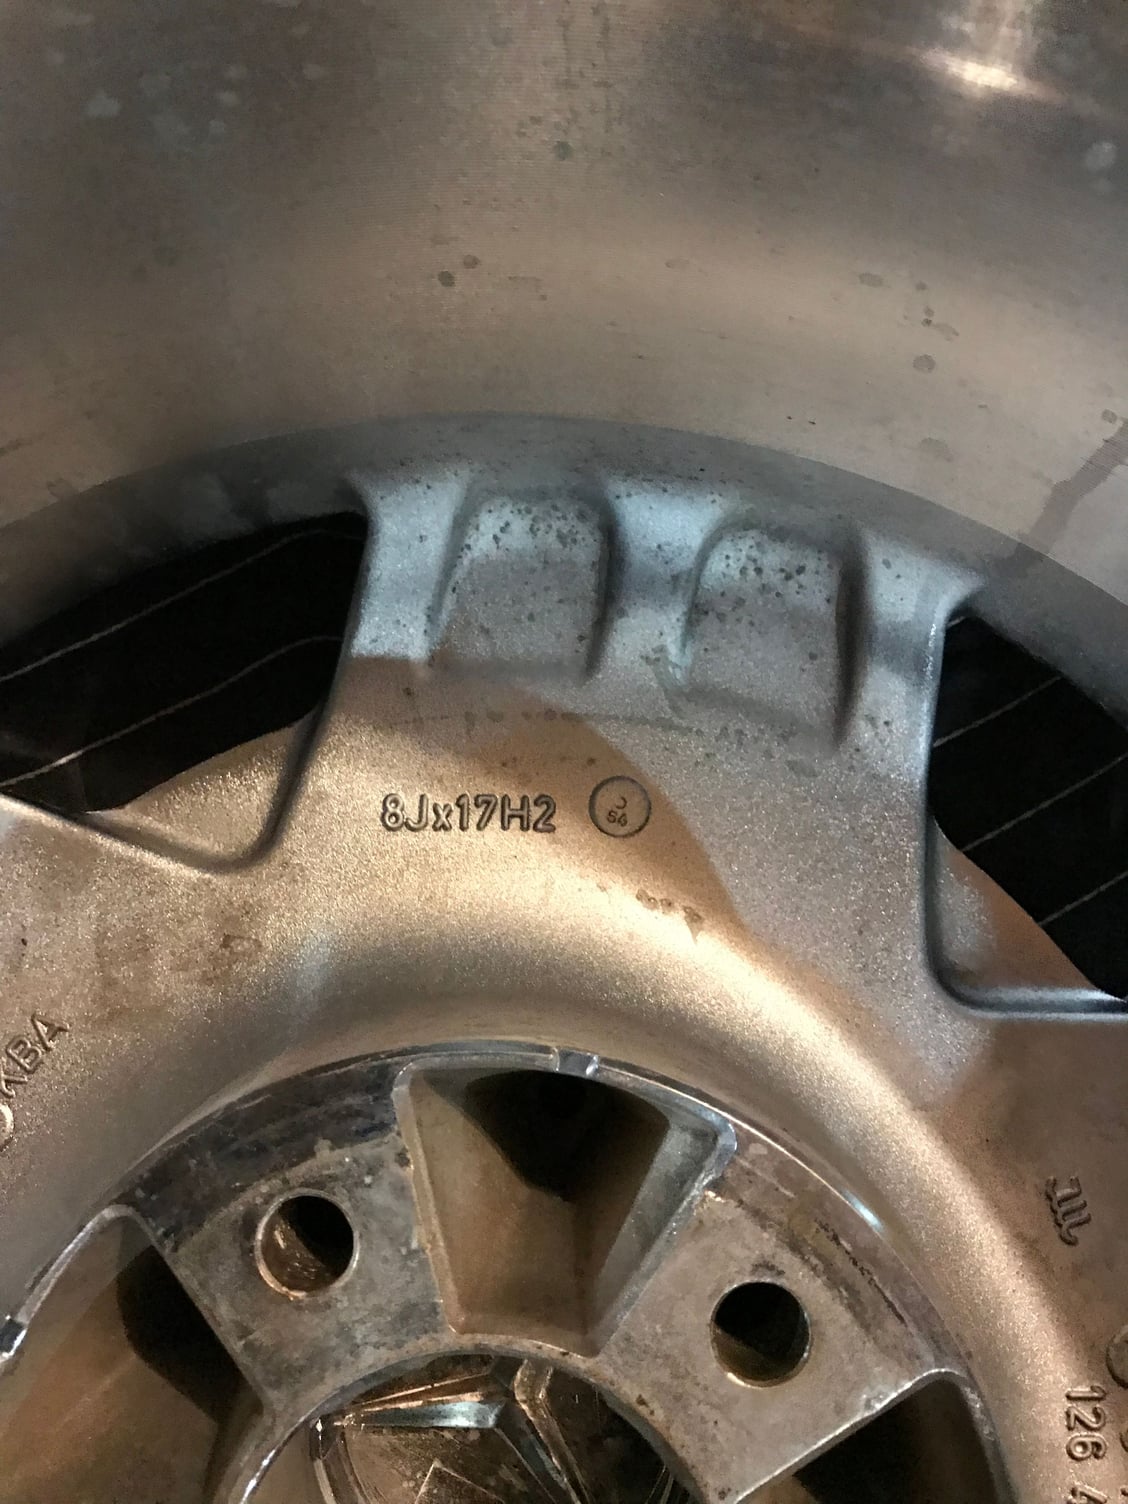 Wheels and Tires/Axles - AMG AERO 1 et11 trade for et 42 - Used - 1986 to 2019 Mercedes-Benz All Models - Chicago, IL 60527, United States